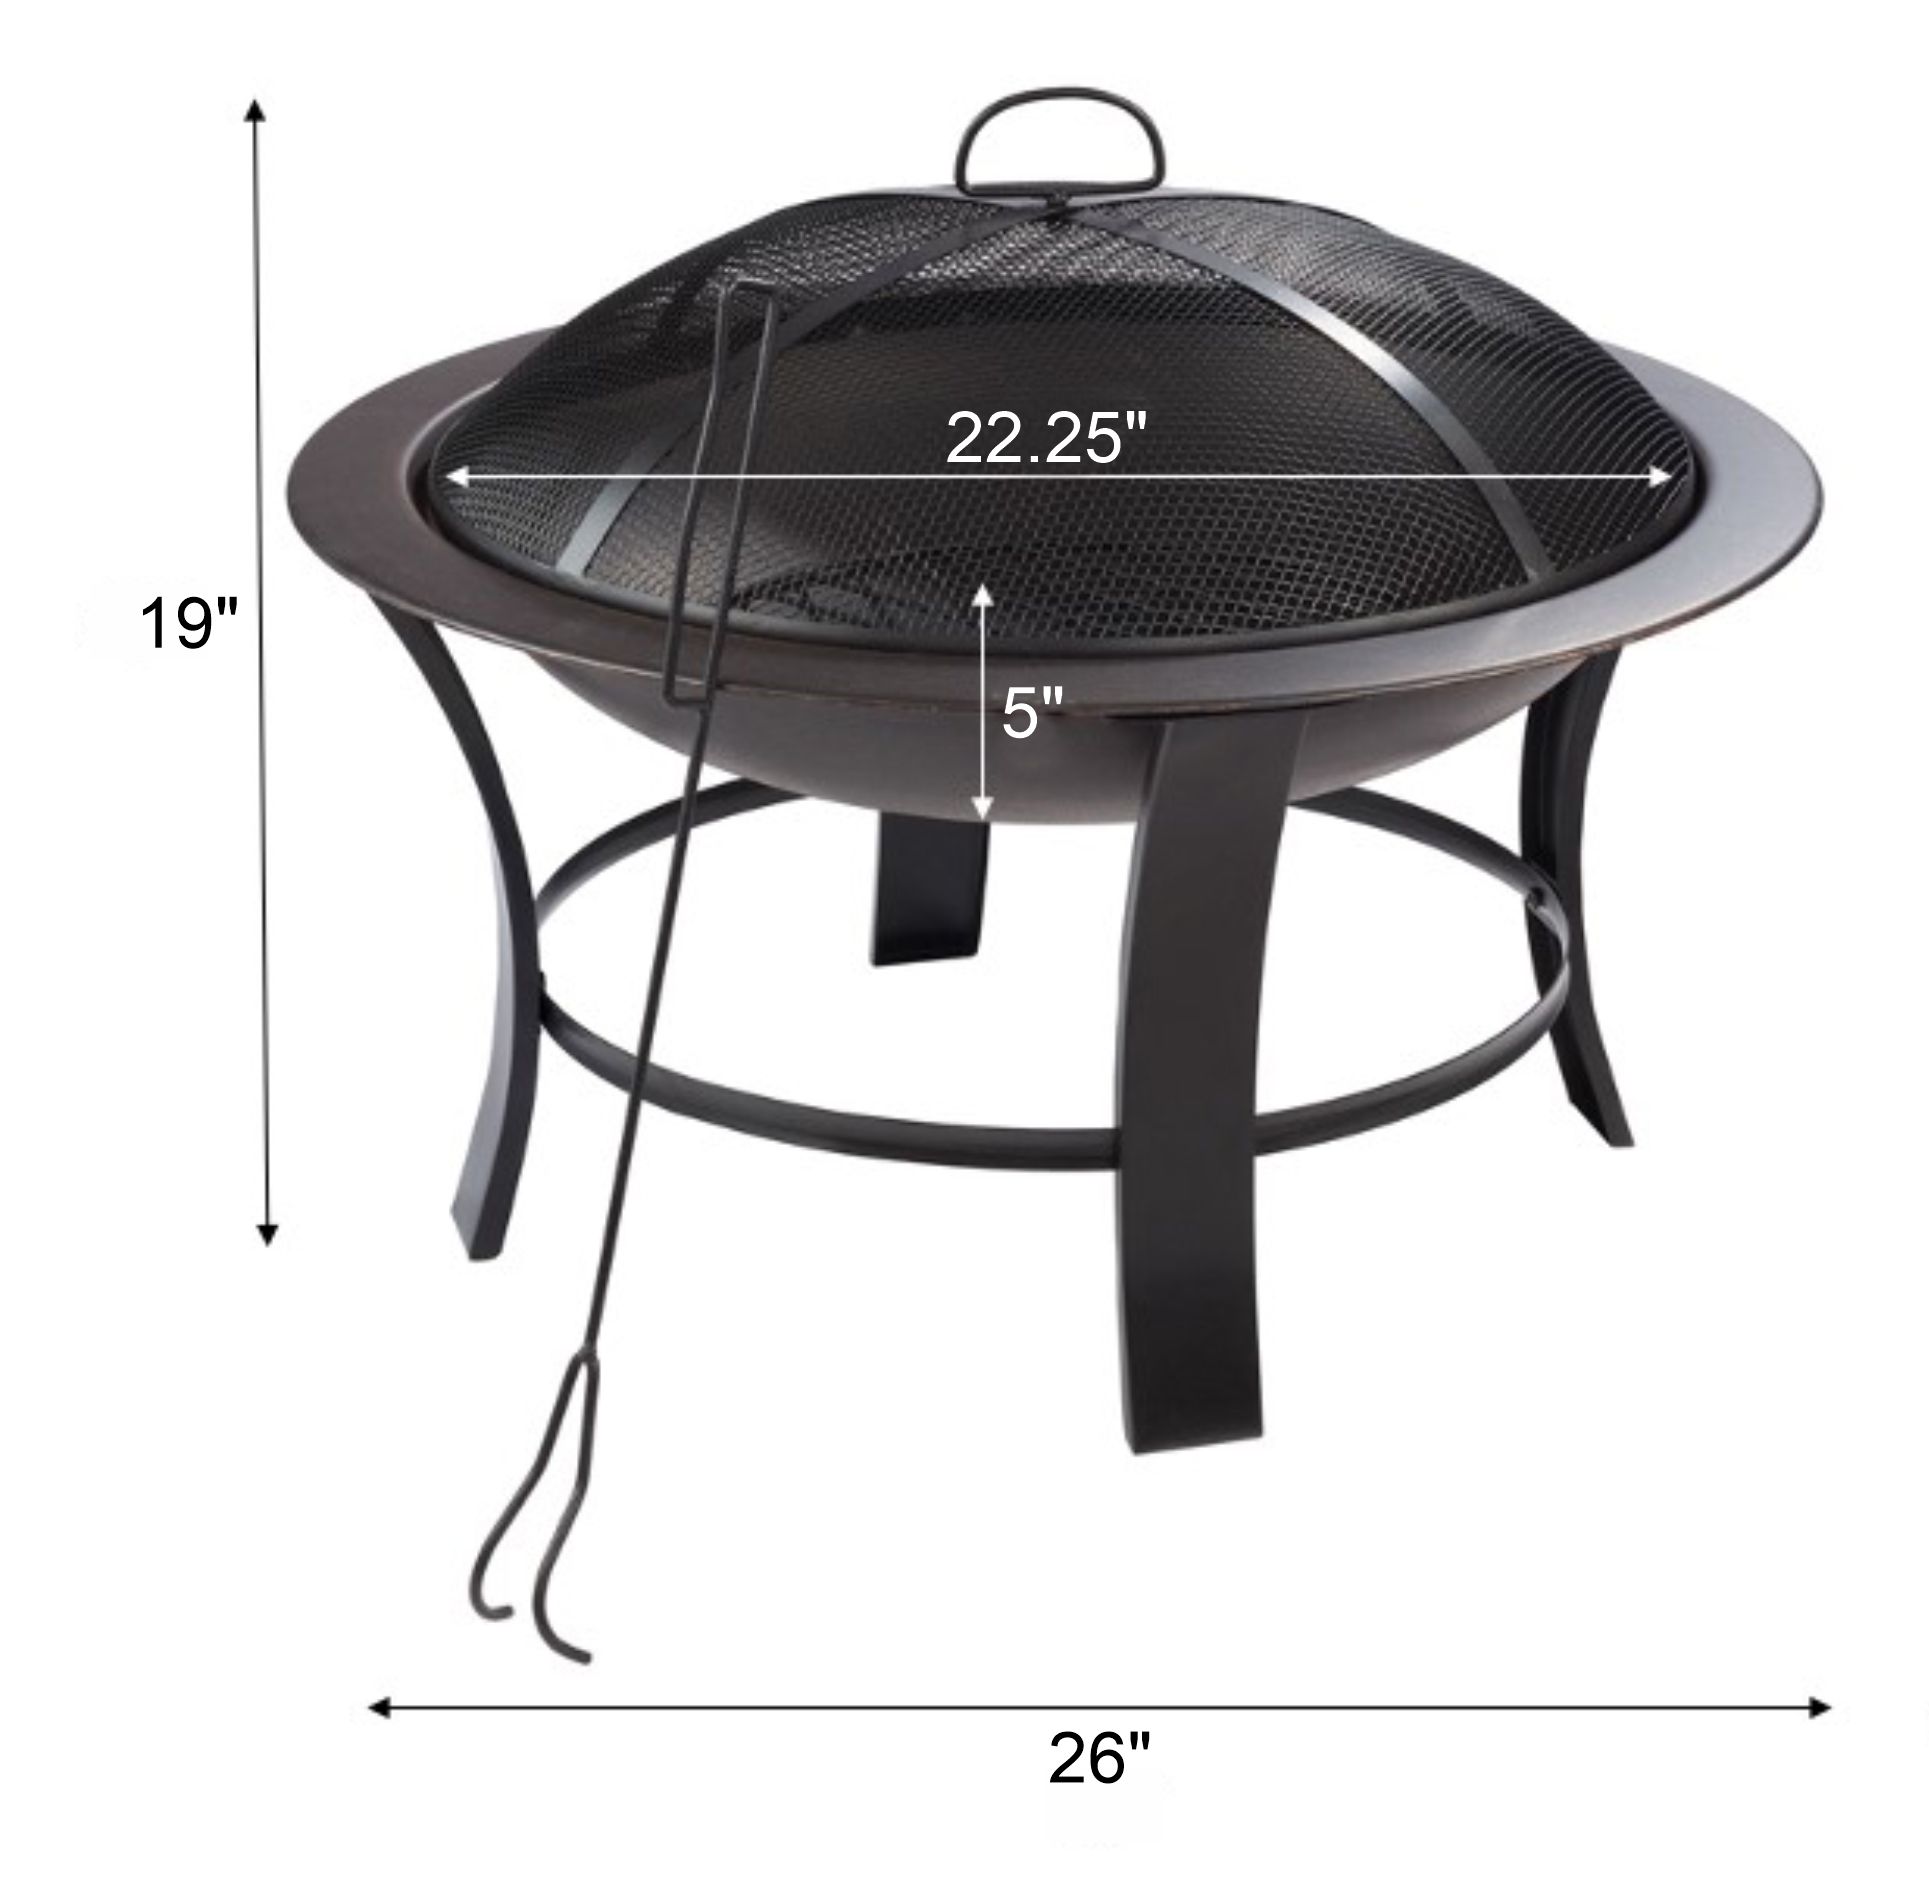 Mainstays 26" Metal Round Outdoor Wood-Burning Fire Pit - image 2 of 8